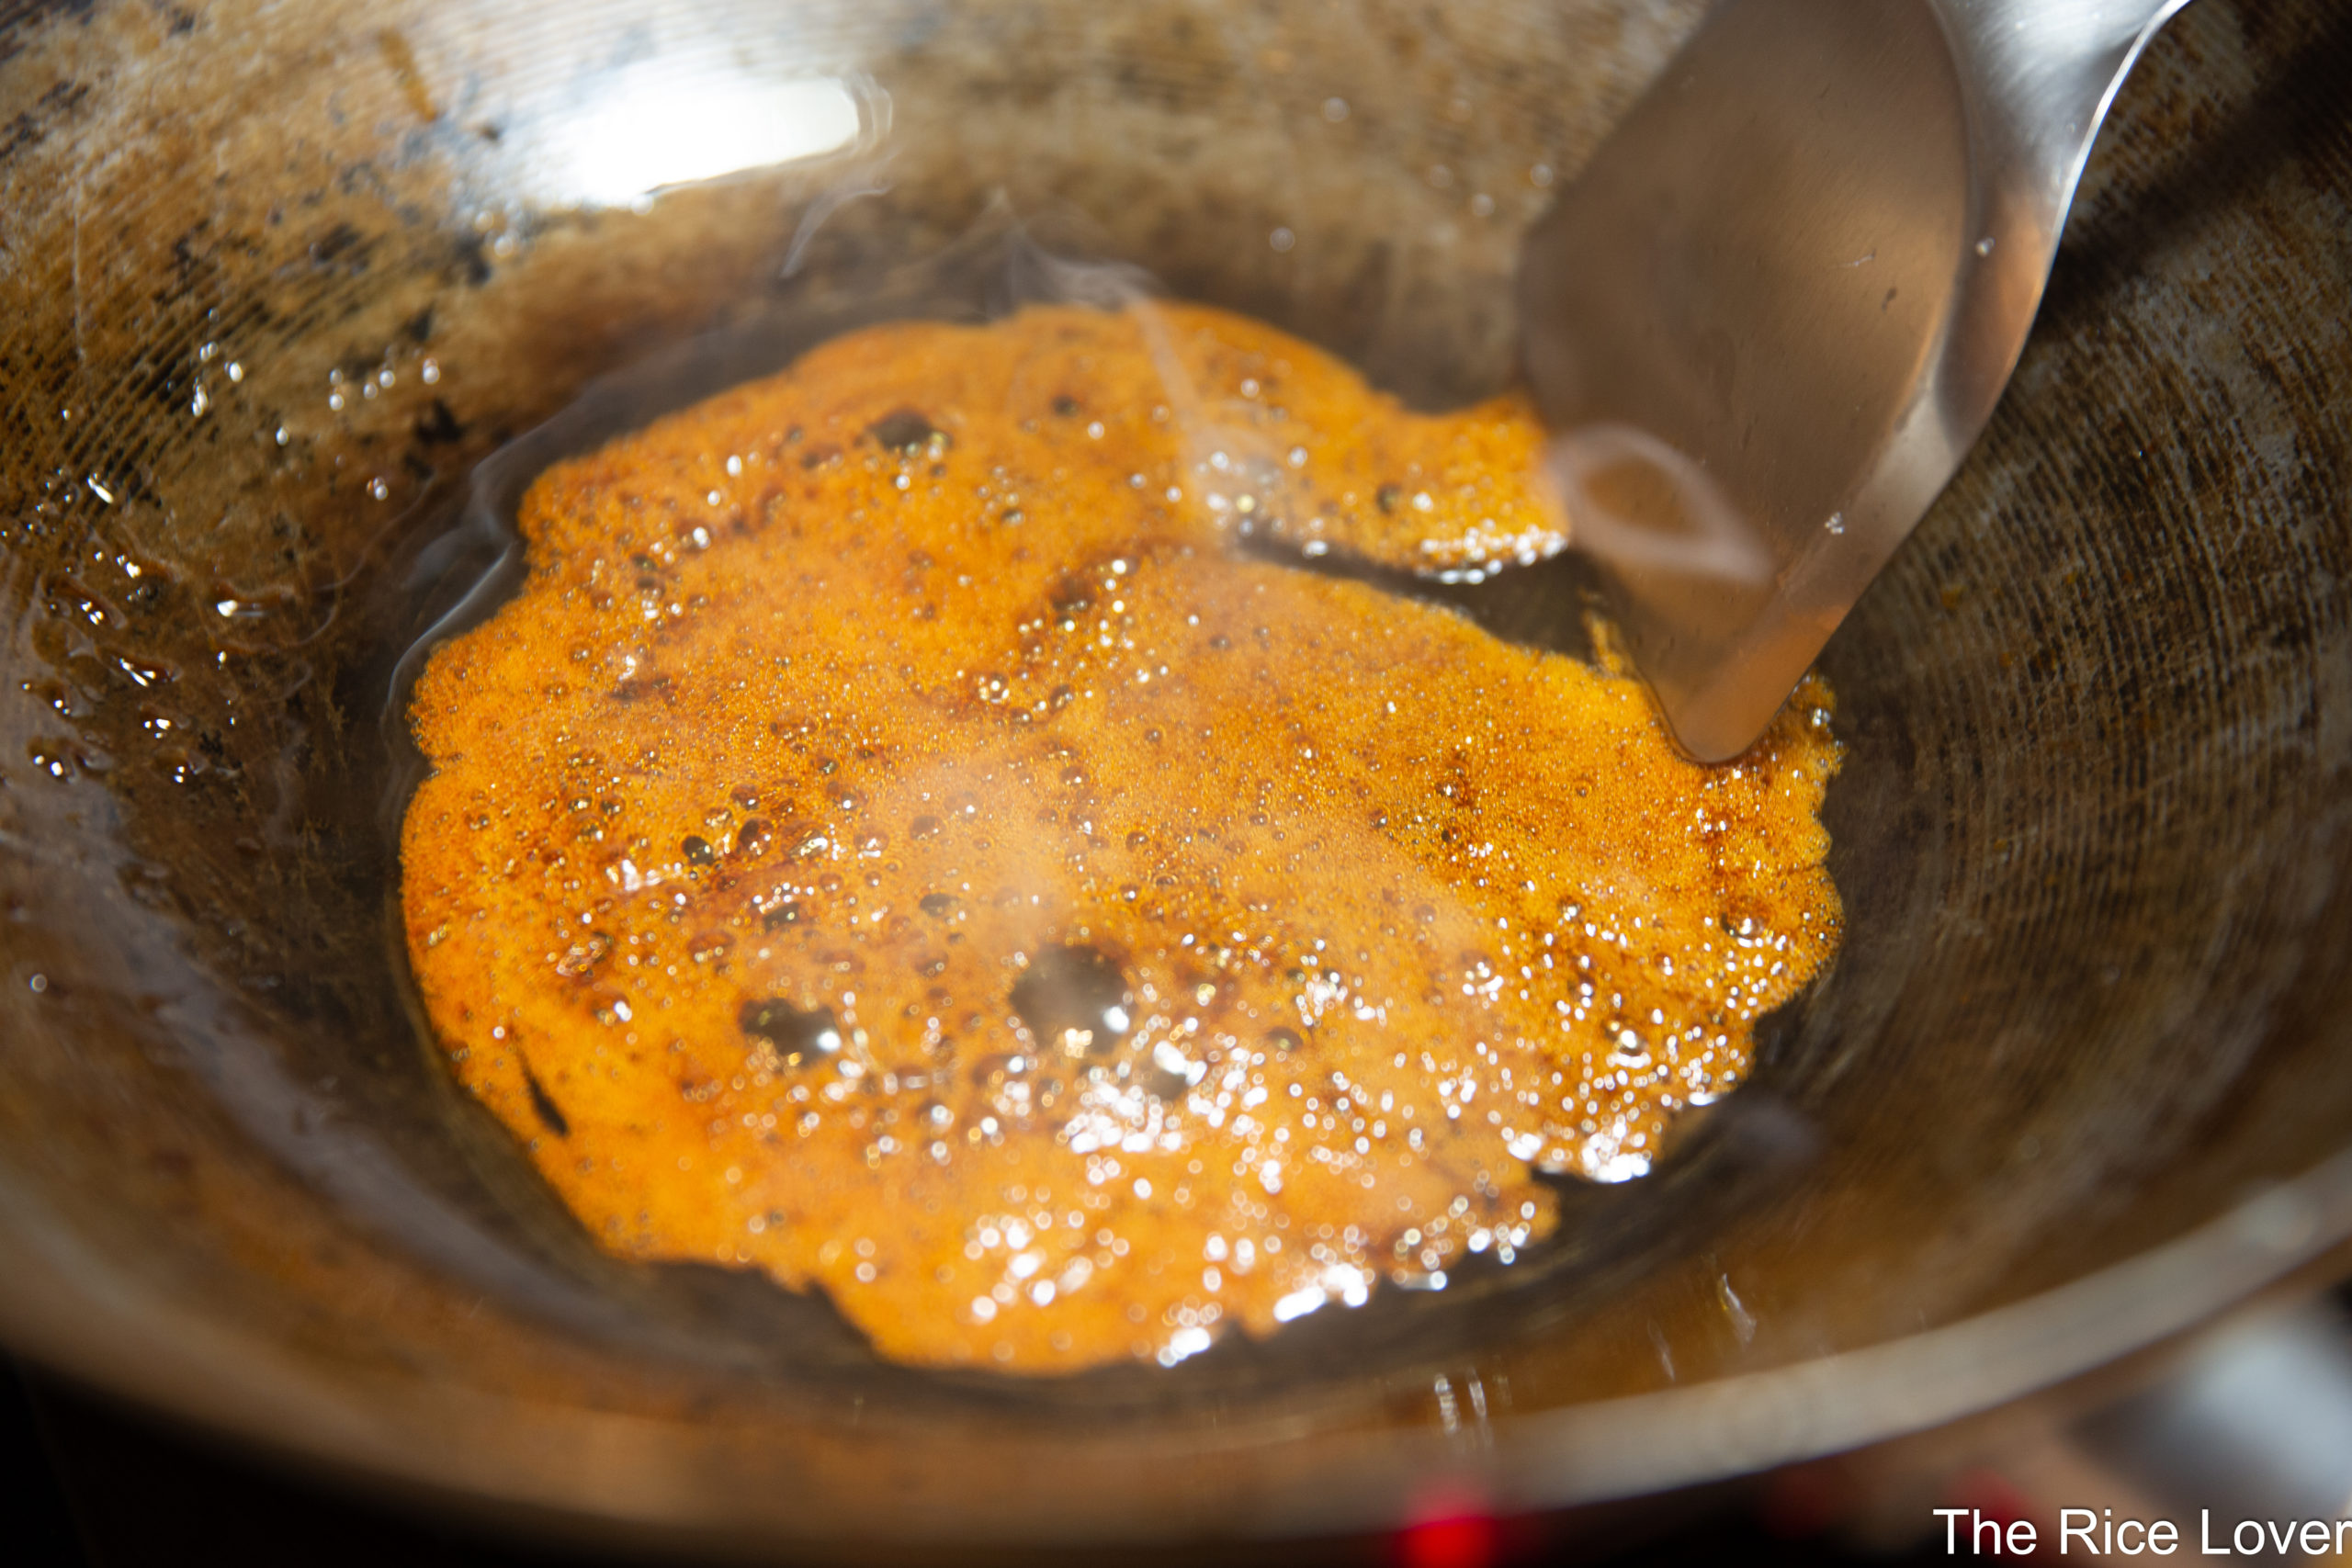 The caramel sauce is ready when it takes on a deep amber color